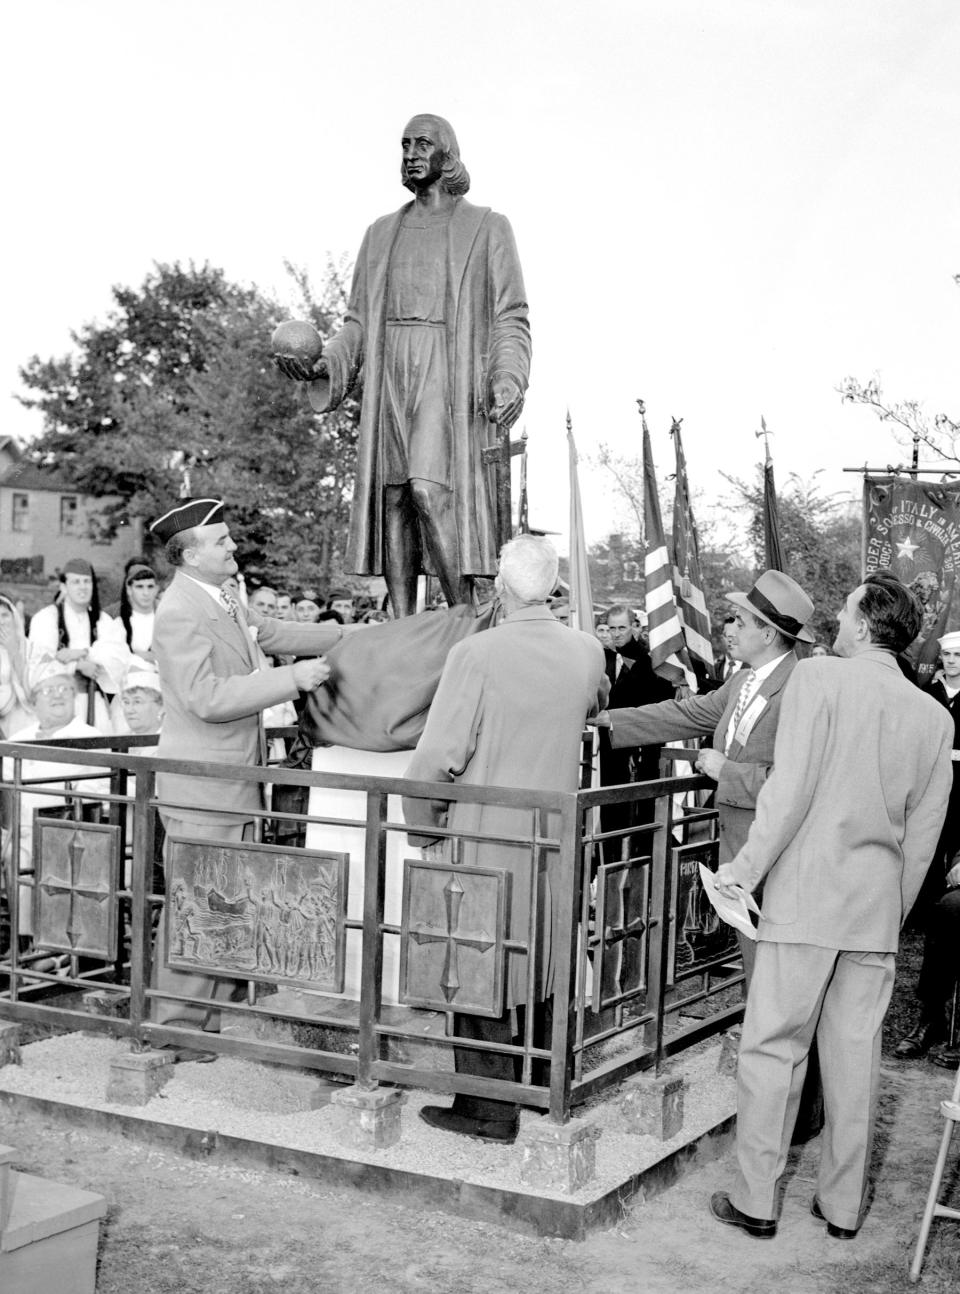 The statue of Christopher Columbus, at the intersection of Memorial Boulevard and Bellevue Avenue in Newport, is unveiled in this photo from Oct. 12, 1953.